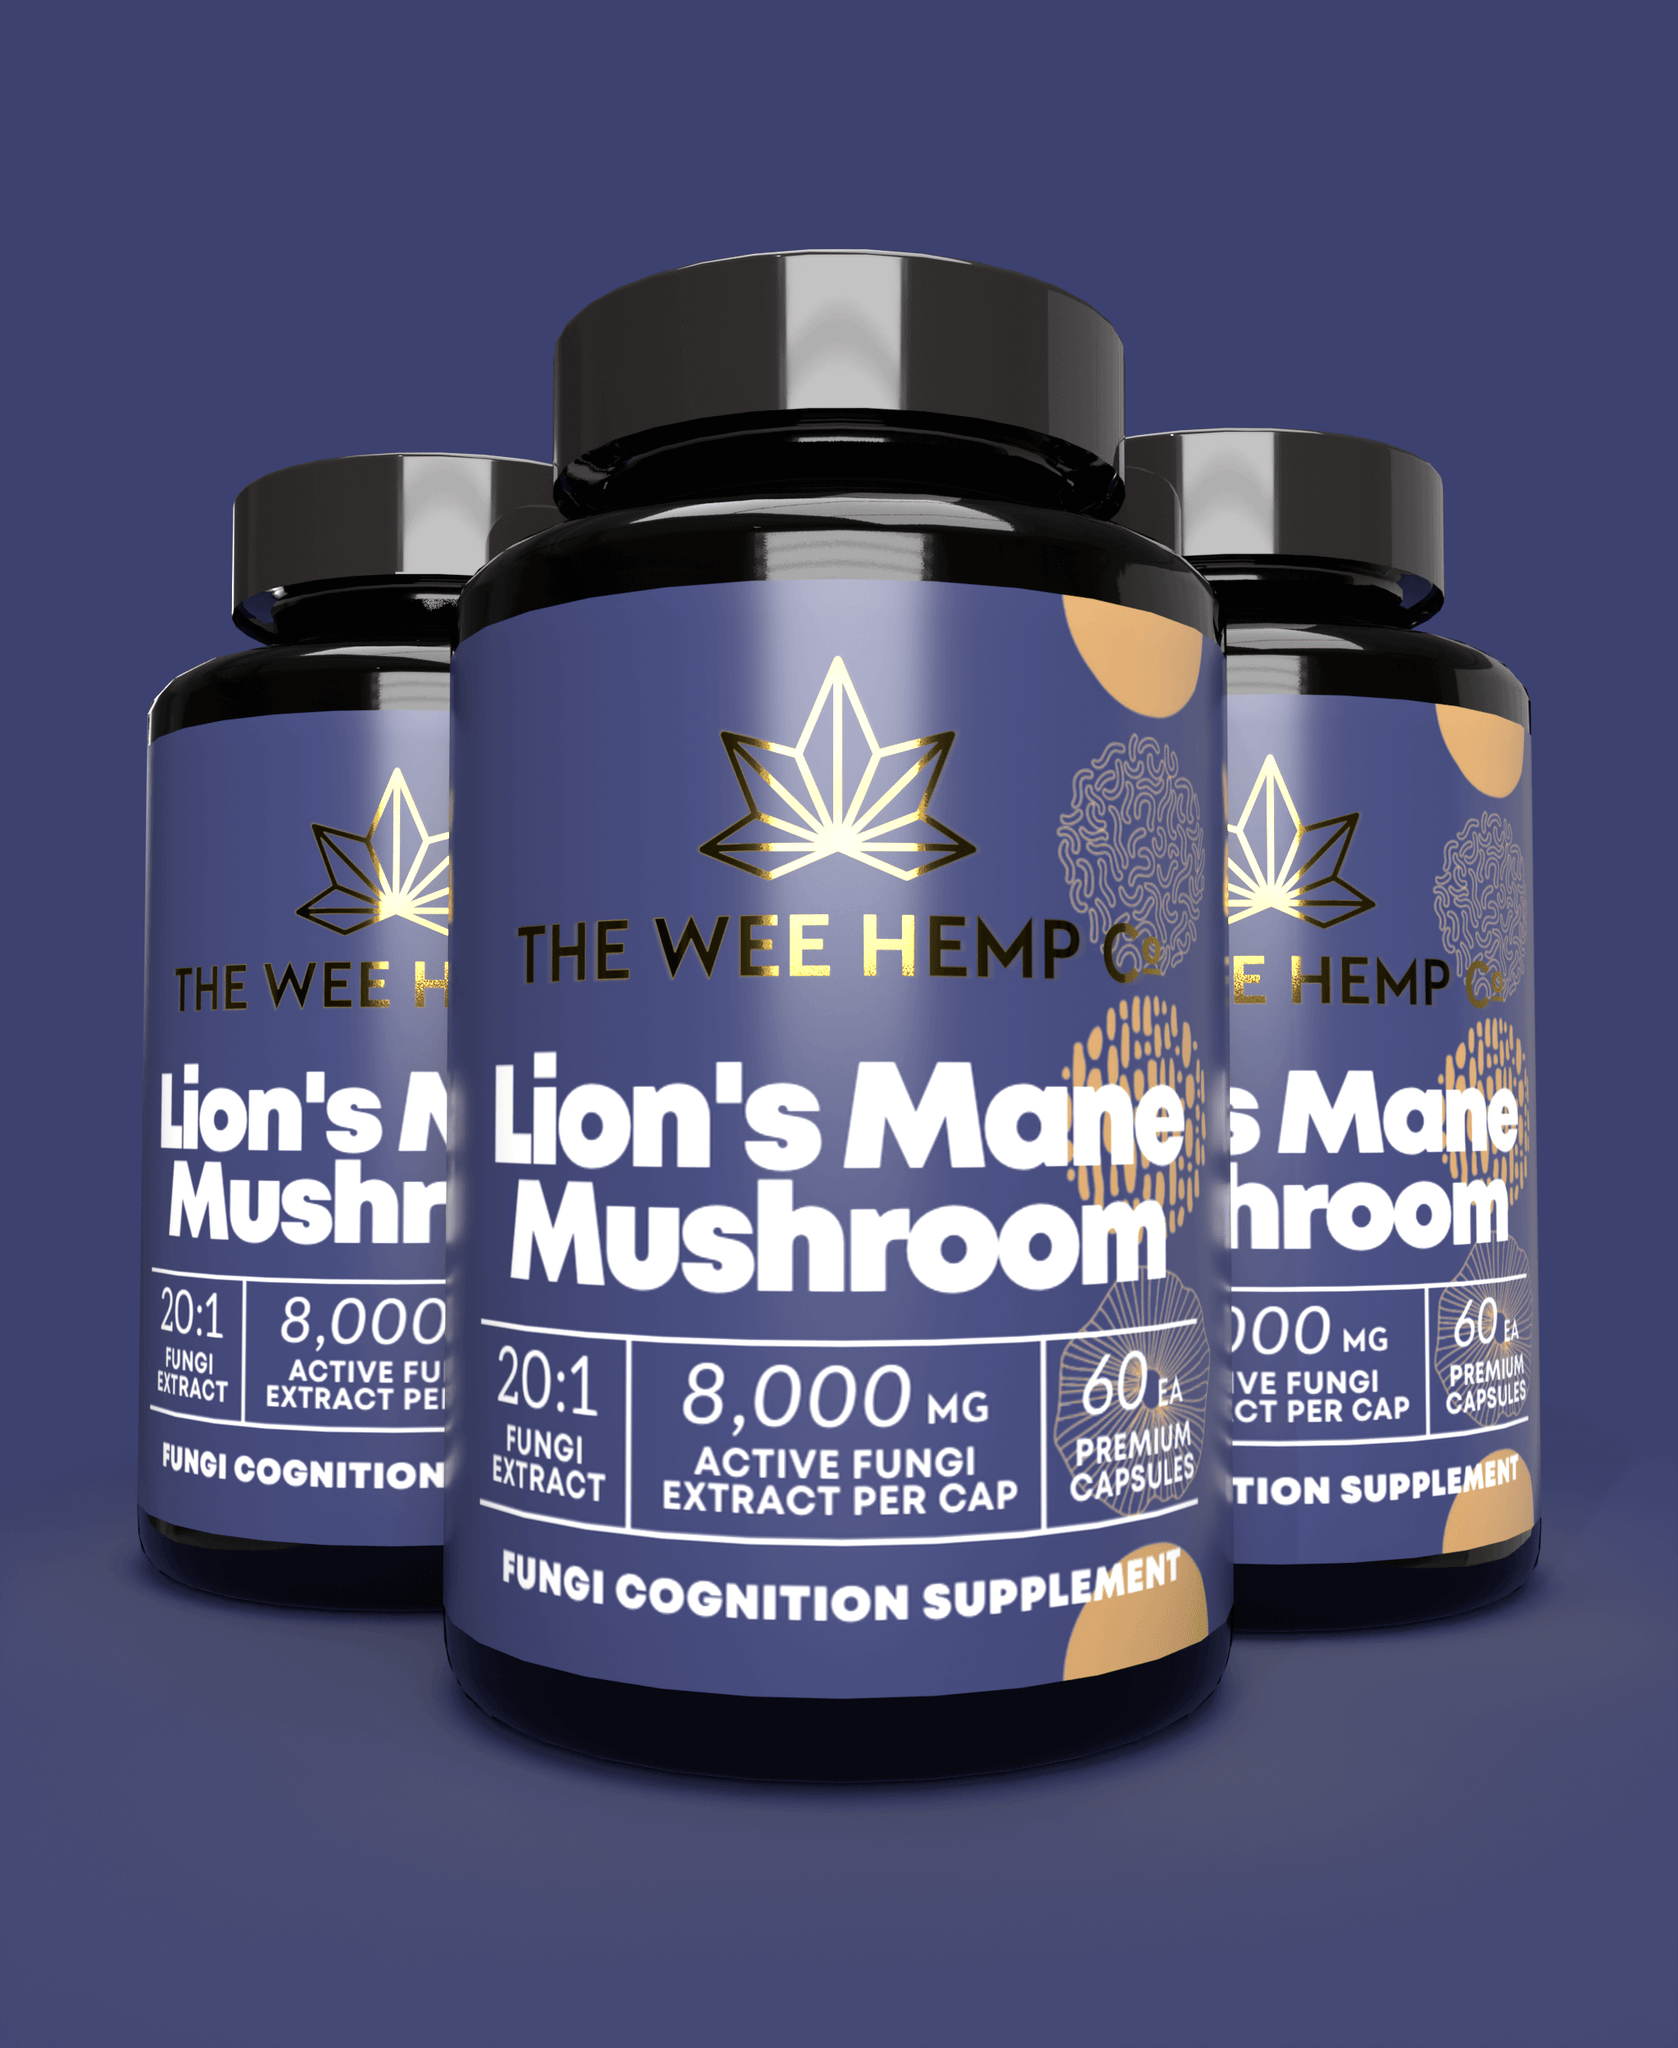 '3 Pack & Save' Lion's Mane Mushroom Clean Extract, No Bulking Agents. The Wee Hemp Company, Aberdeenshire, Scotland. Blue background with mushroom supplements in foreground. Scotland's Leading CBD Company.